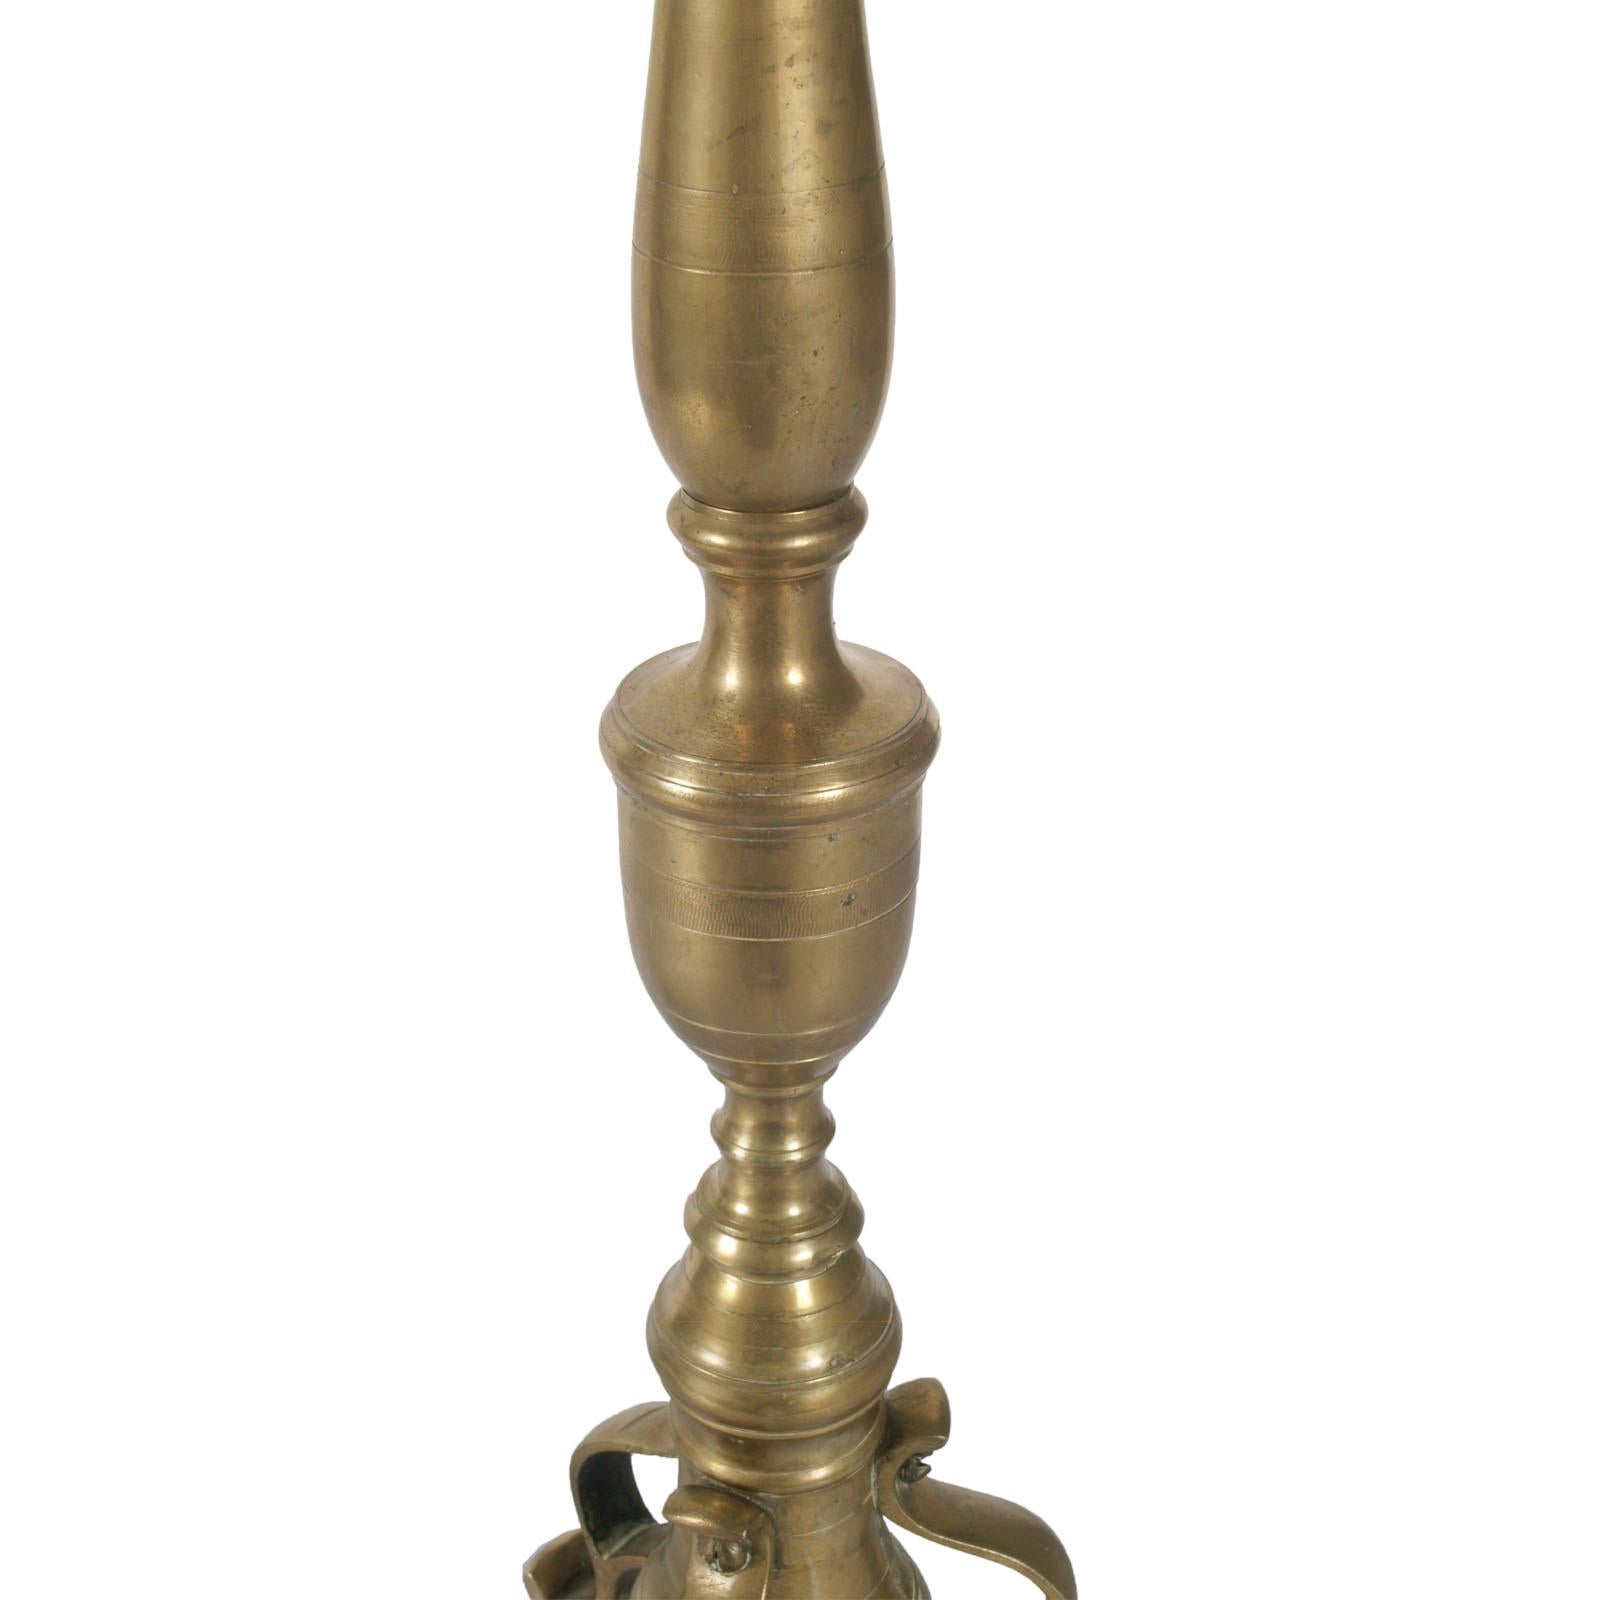 Italian 18th Century Antique Lampholder Candelabrum in Gilt Brass with Tripod Stand For Sale